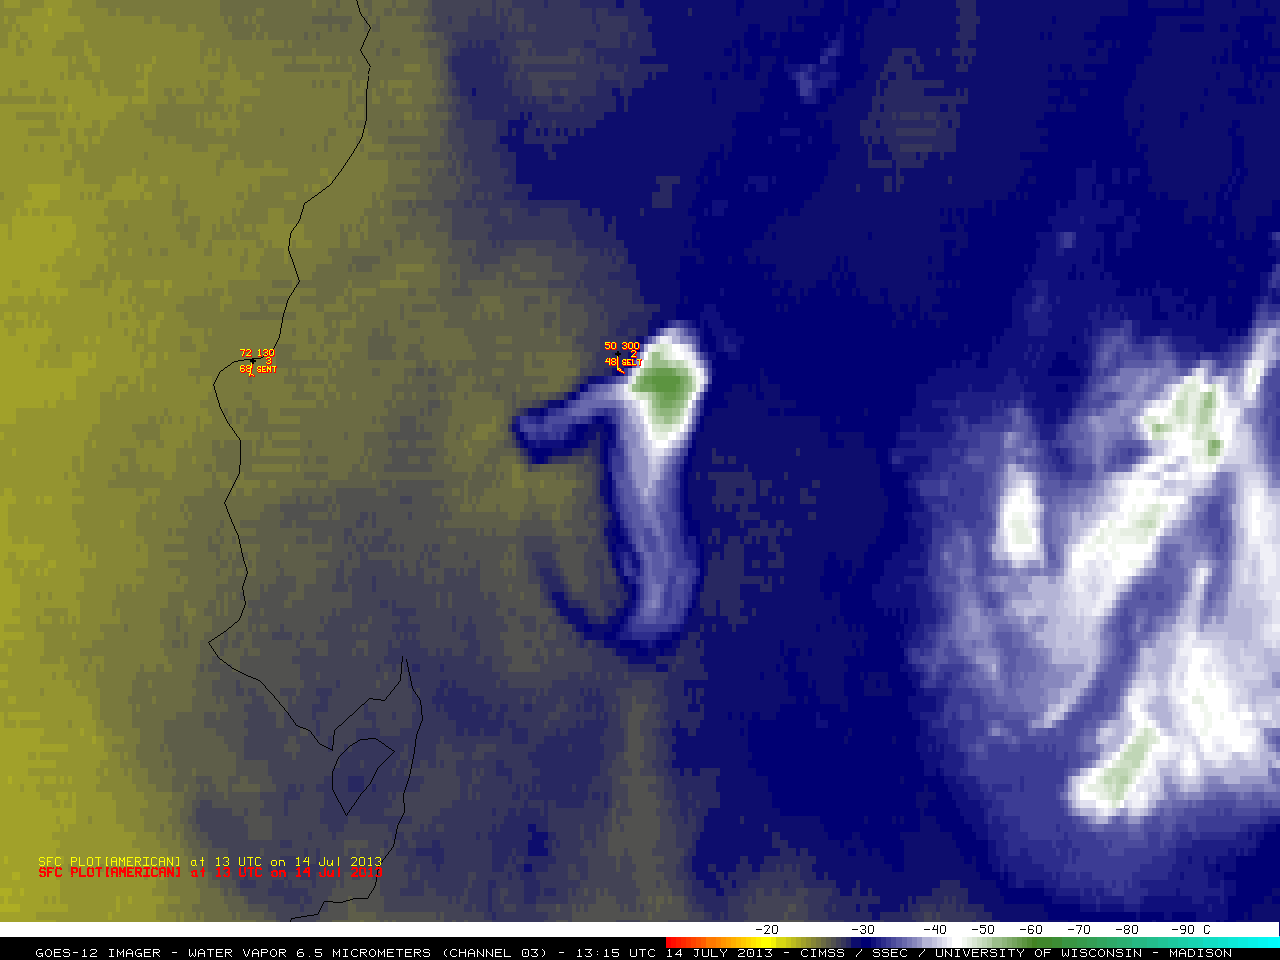 GOES-12 6.5 Âµm water vapor channel images (click image to play animation)